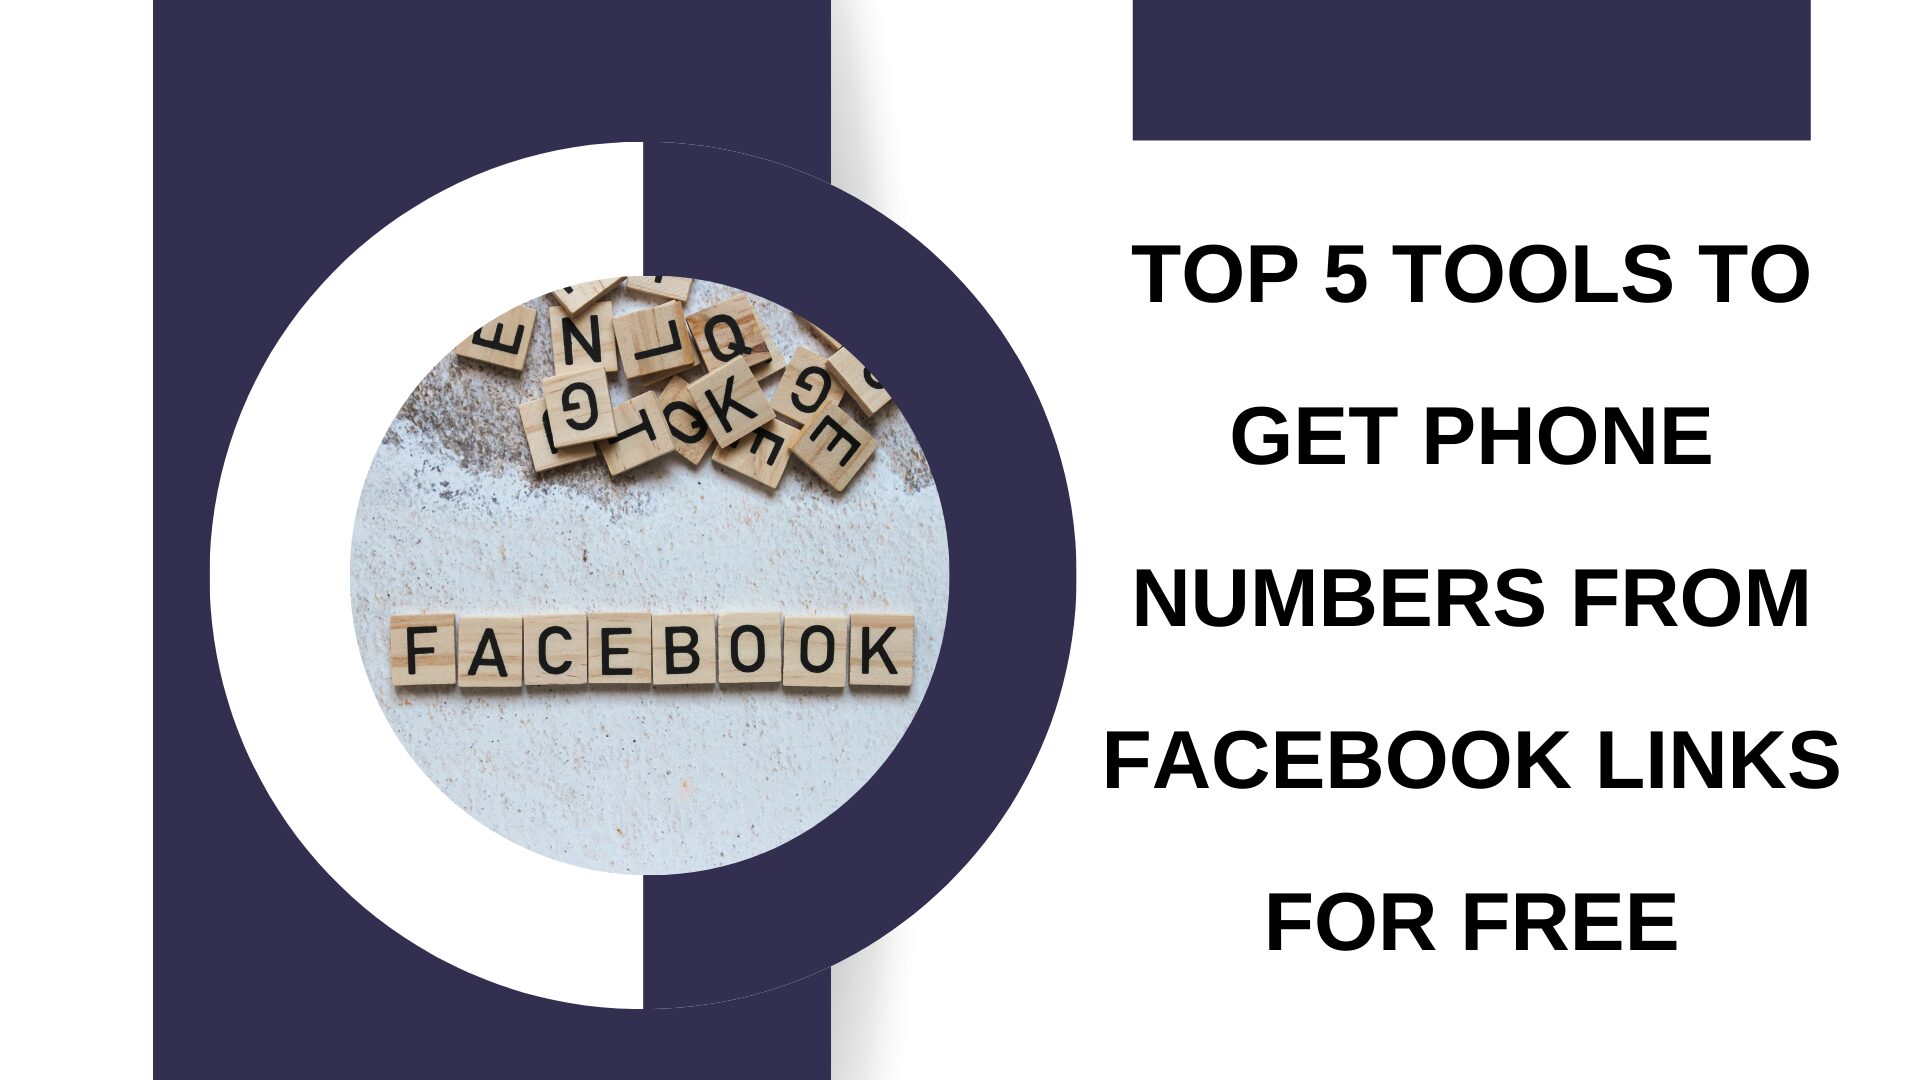 Top 5 tools to get phone numbers from Facebook links for free